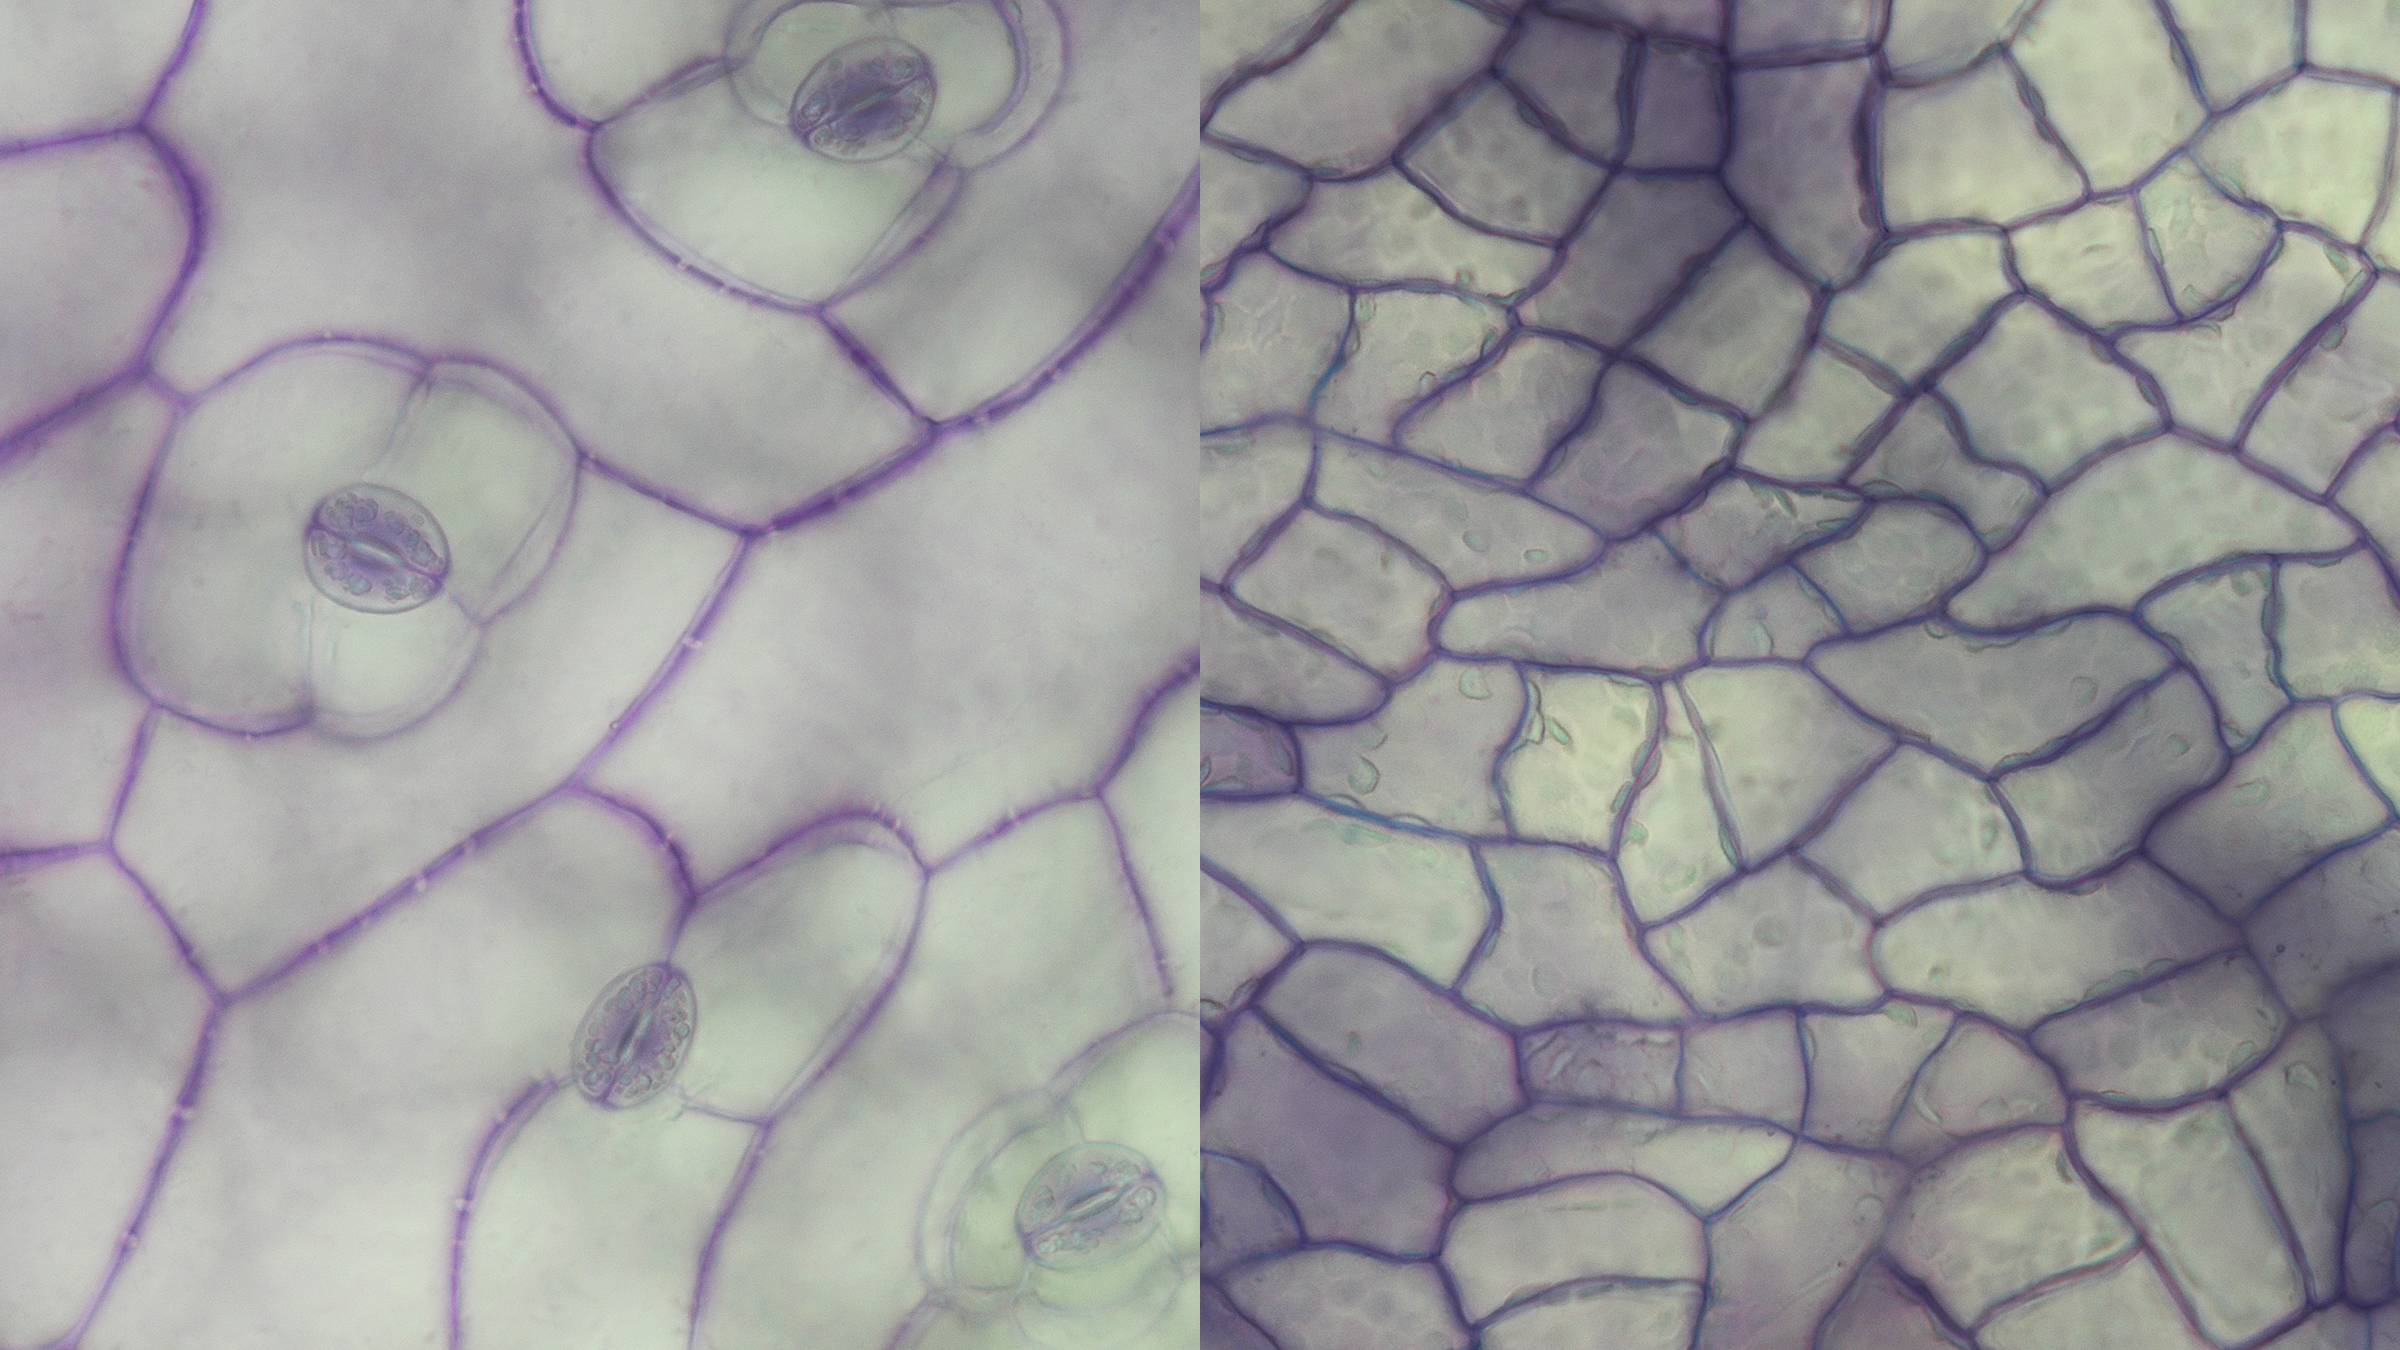 When grown on land, the amphibious plant Rorippa aquatica produces pores called stomata (left); but grown in water, it does not. Credit: Shuka Ikematsu.